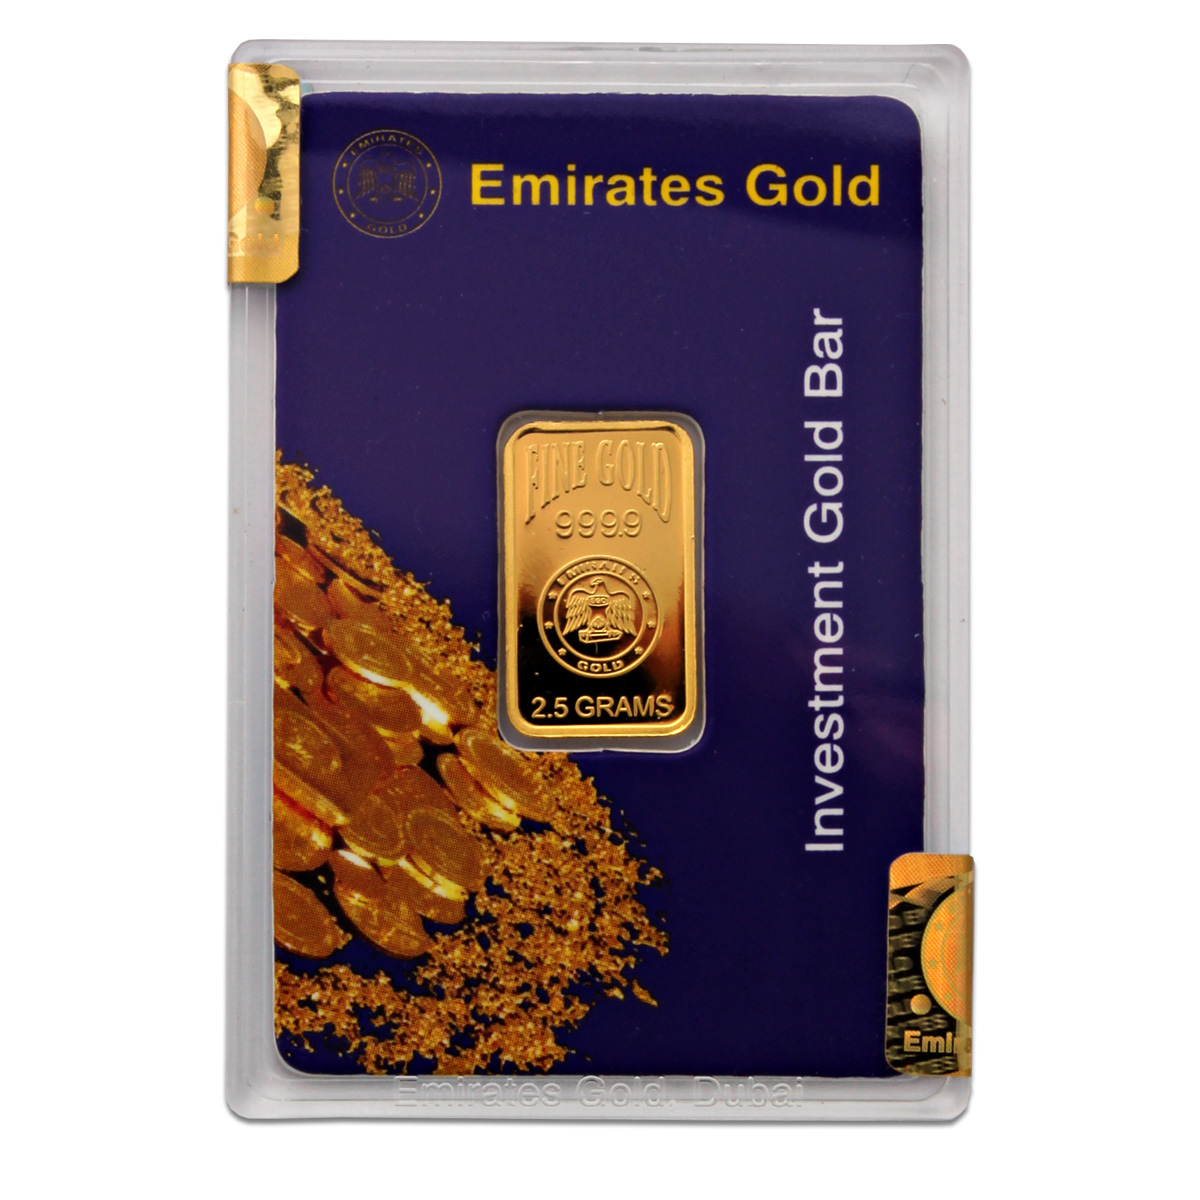 2.5g Gold Bar - Emirates Gold Boxed Certified